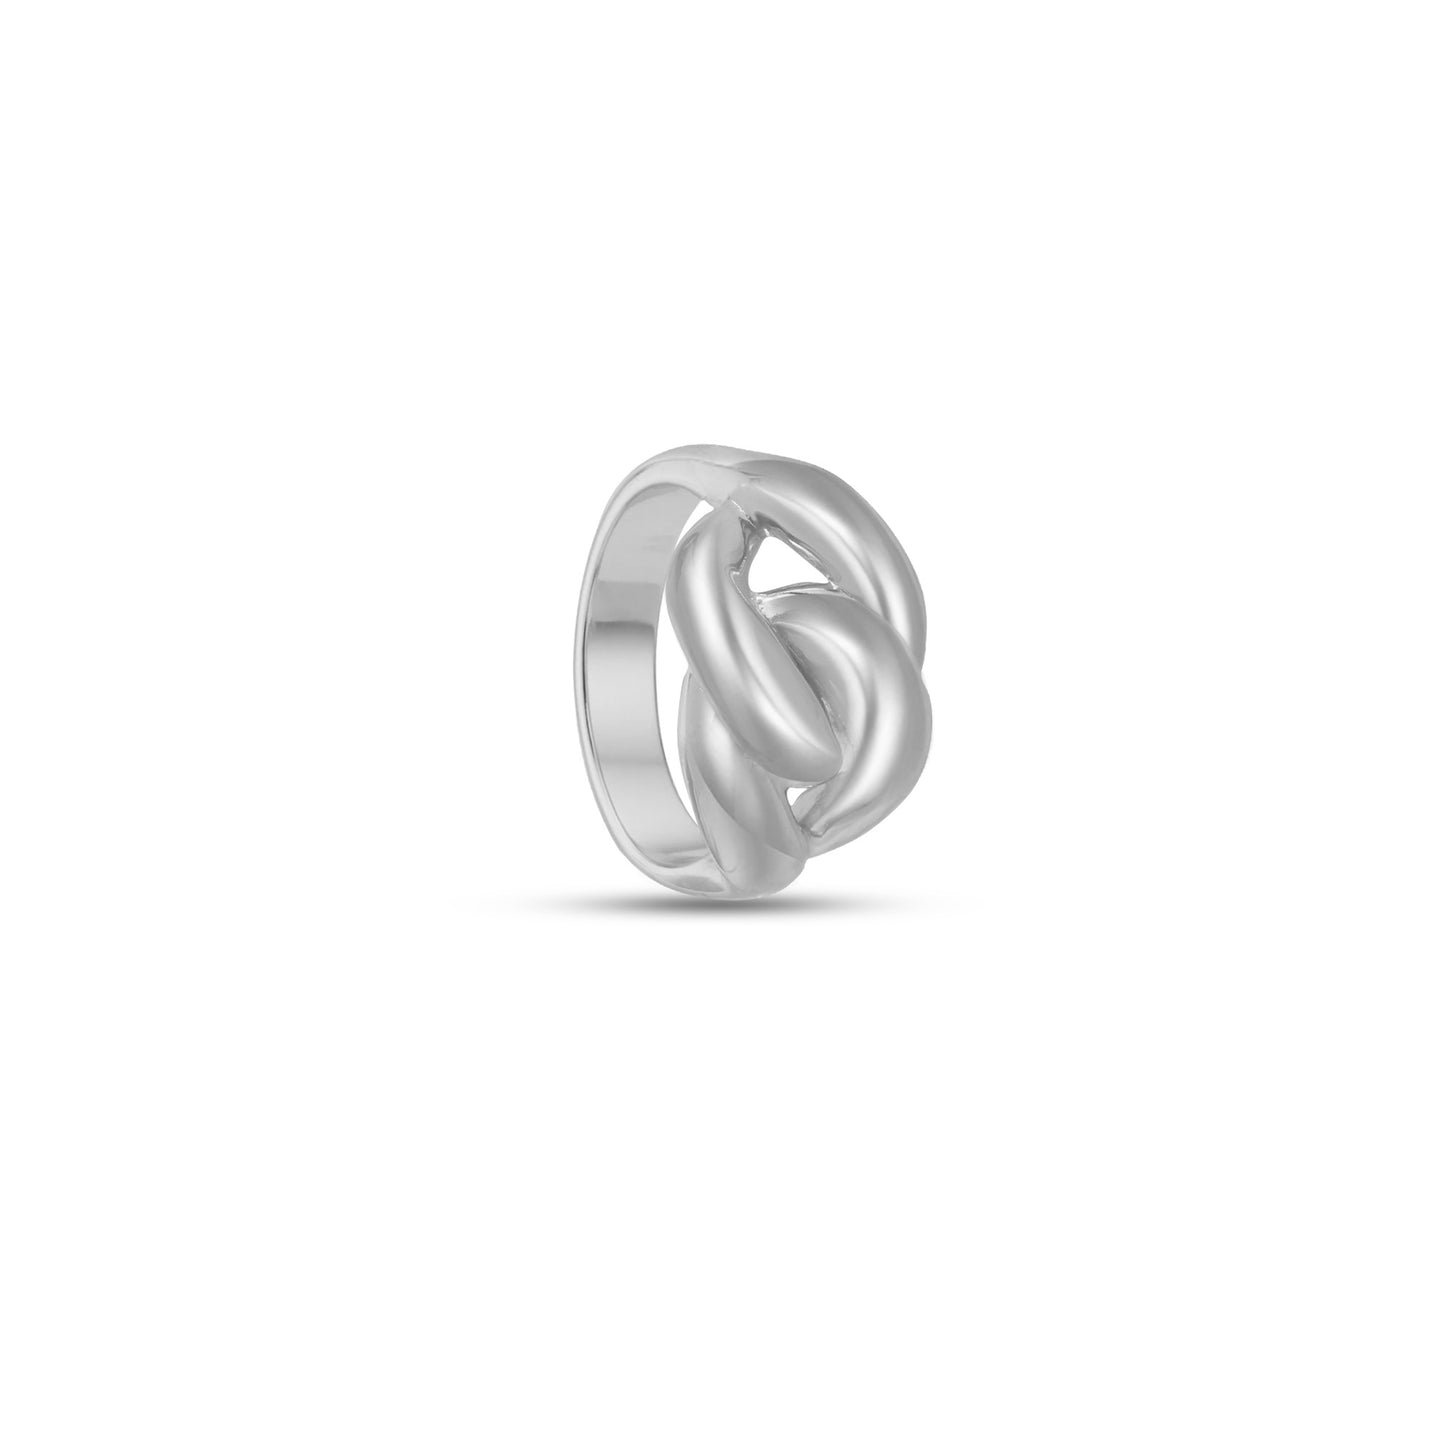 The Willow Knot Ring